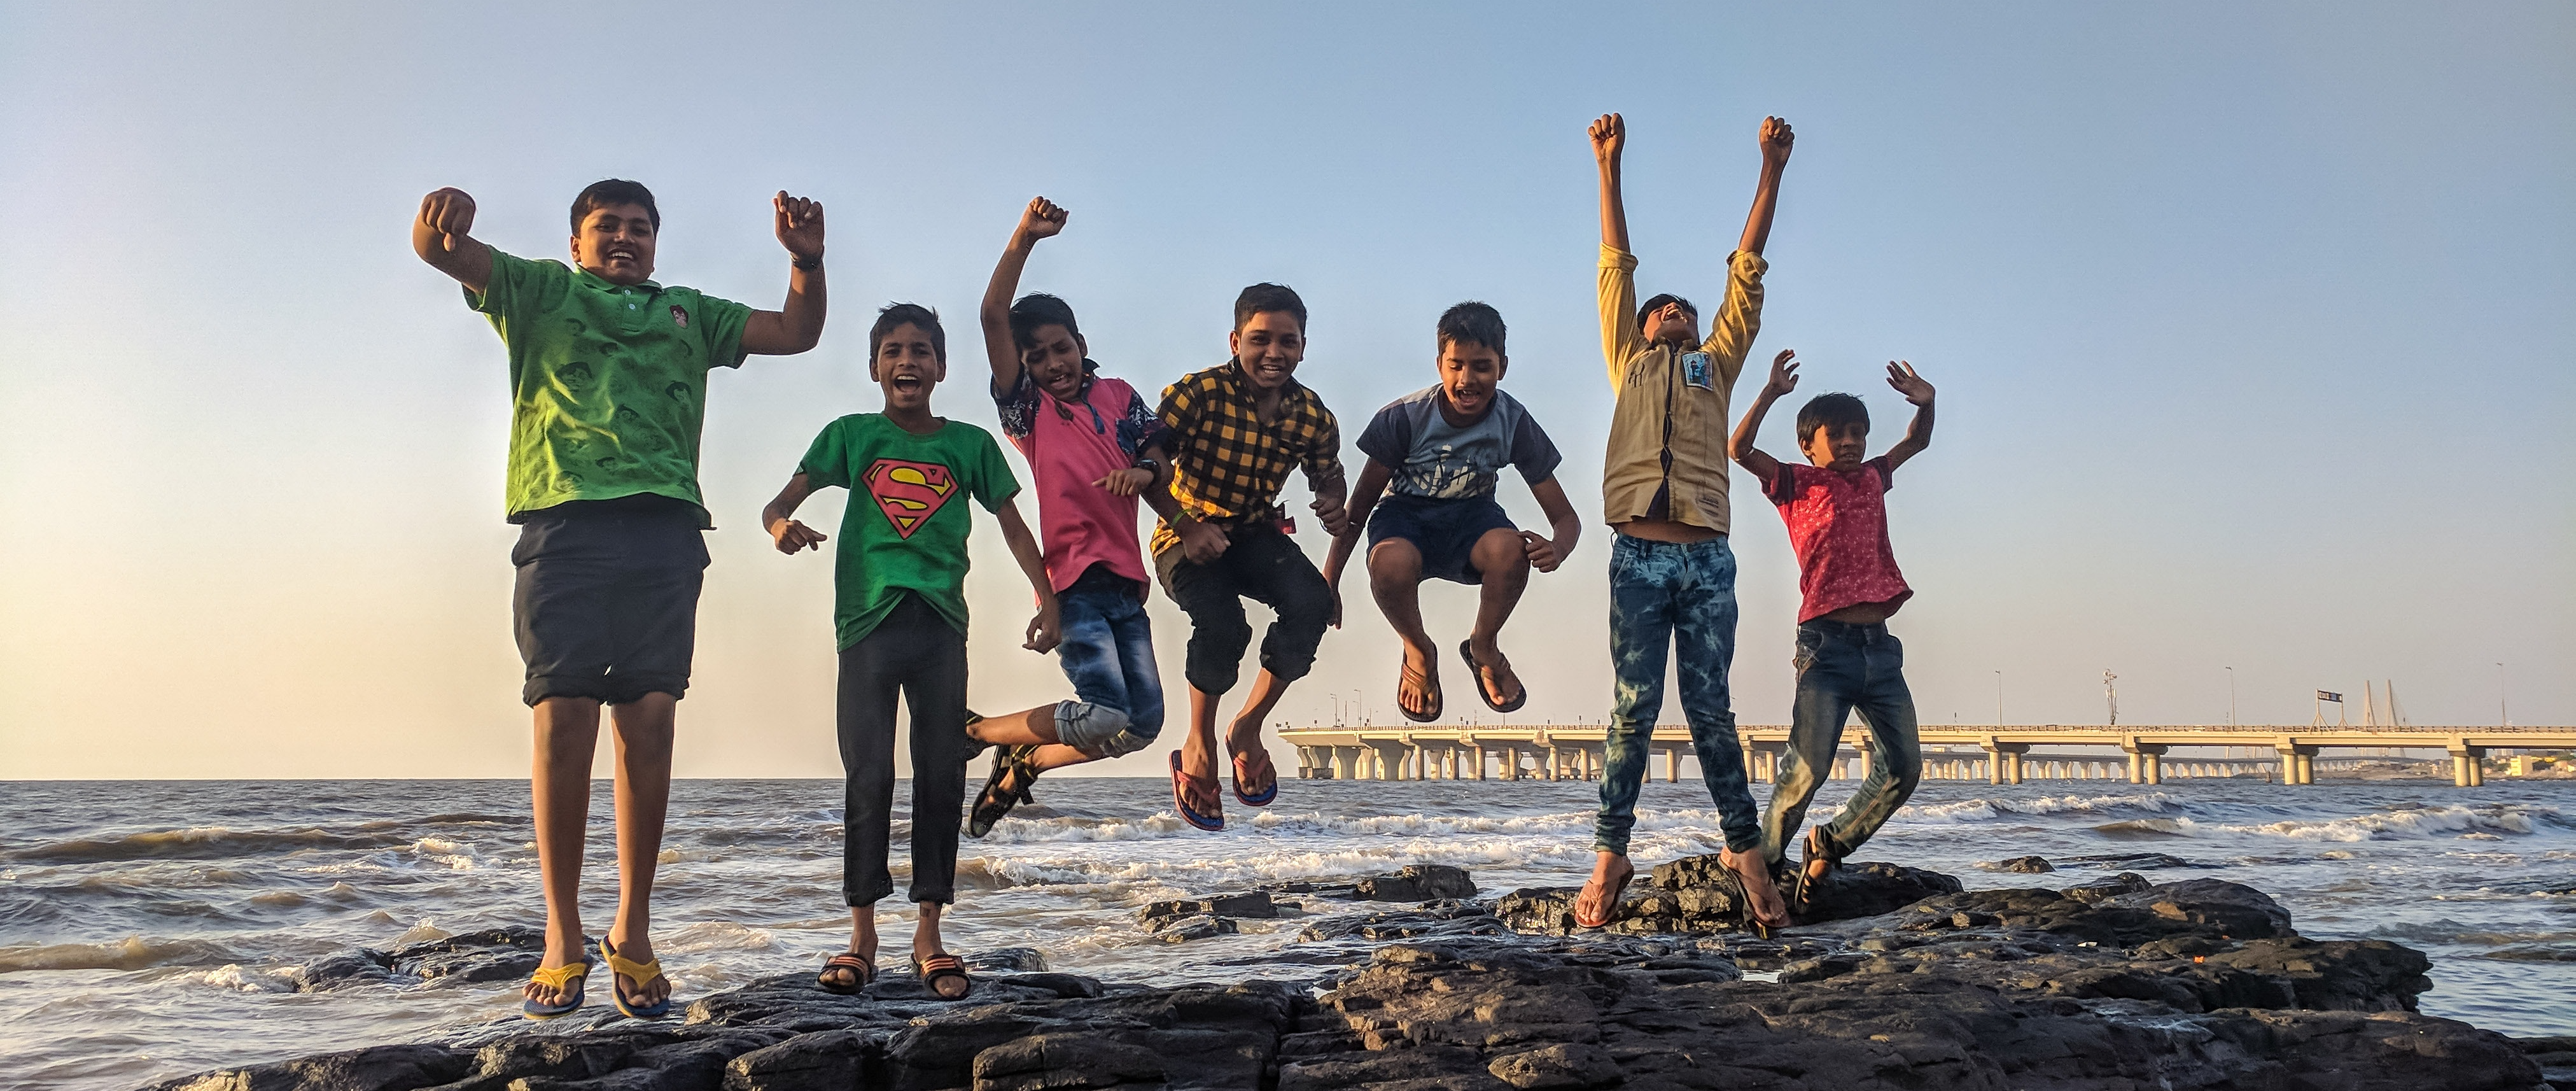 Group of children jumping and celebrating by the ocean